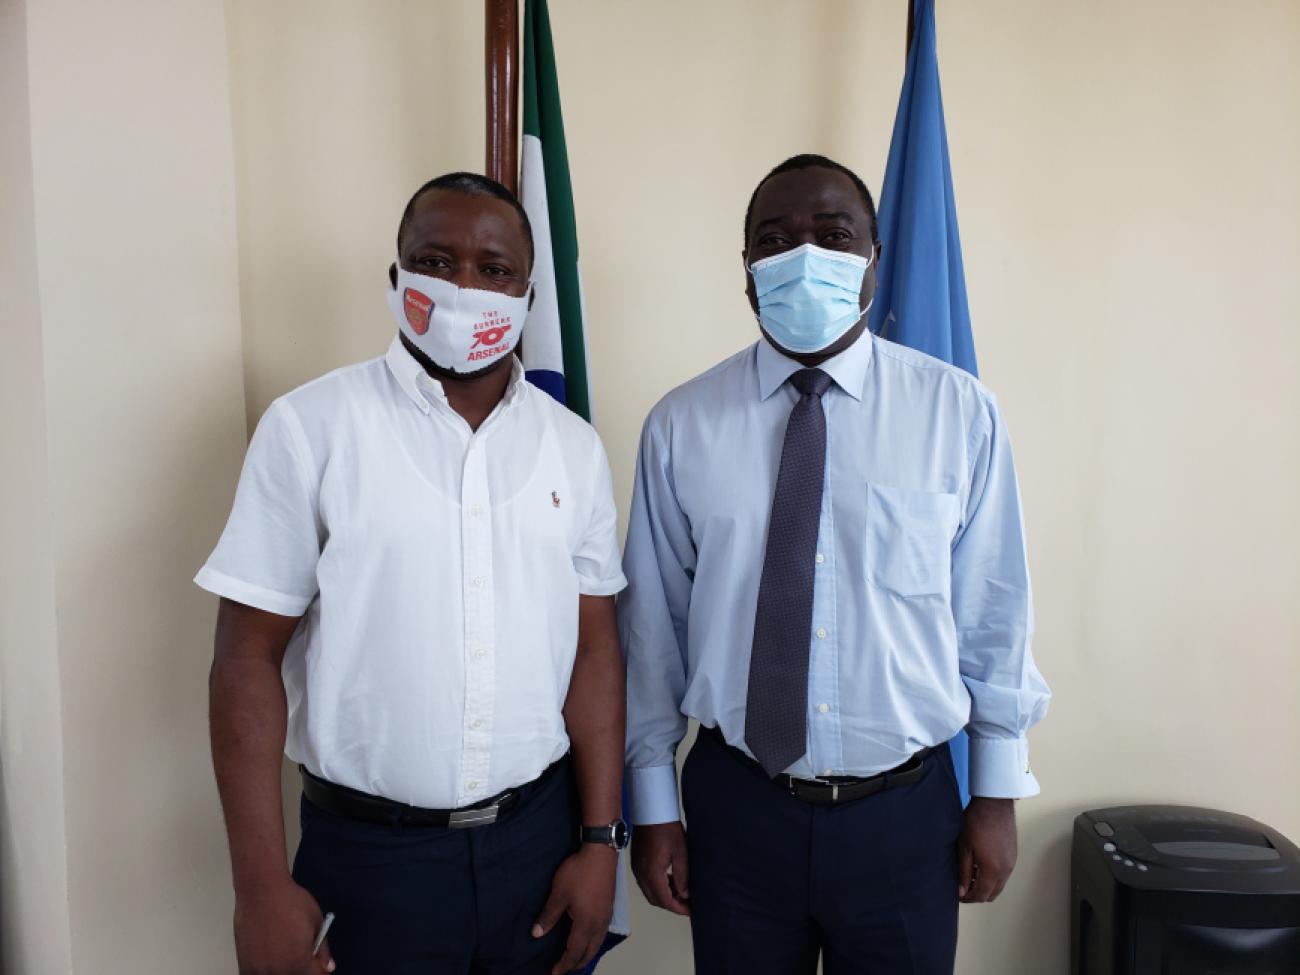 Minister of Youth Affairs, Mr Mohamed Orman Bangura and Resident Coordinator, Dr Babatunde Ahonsi